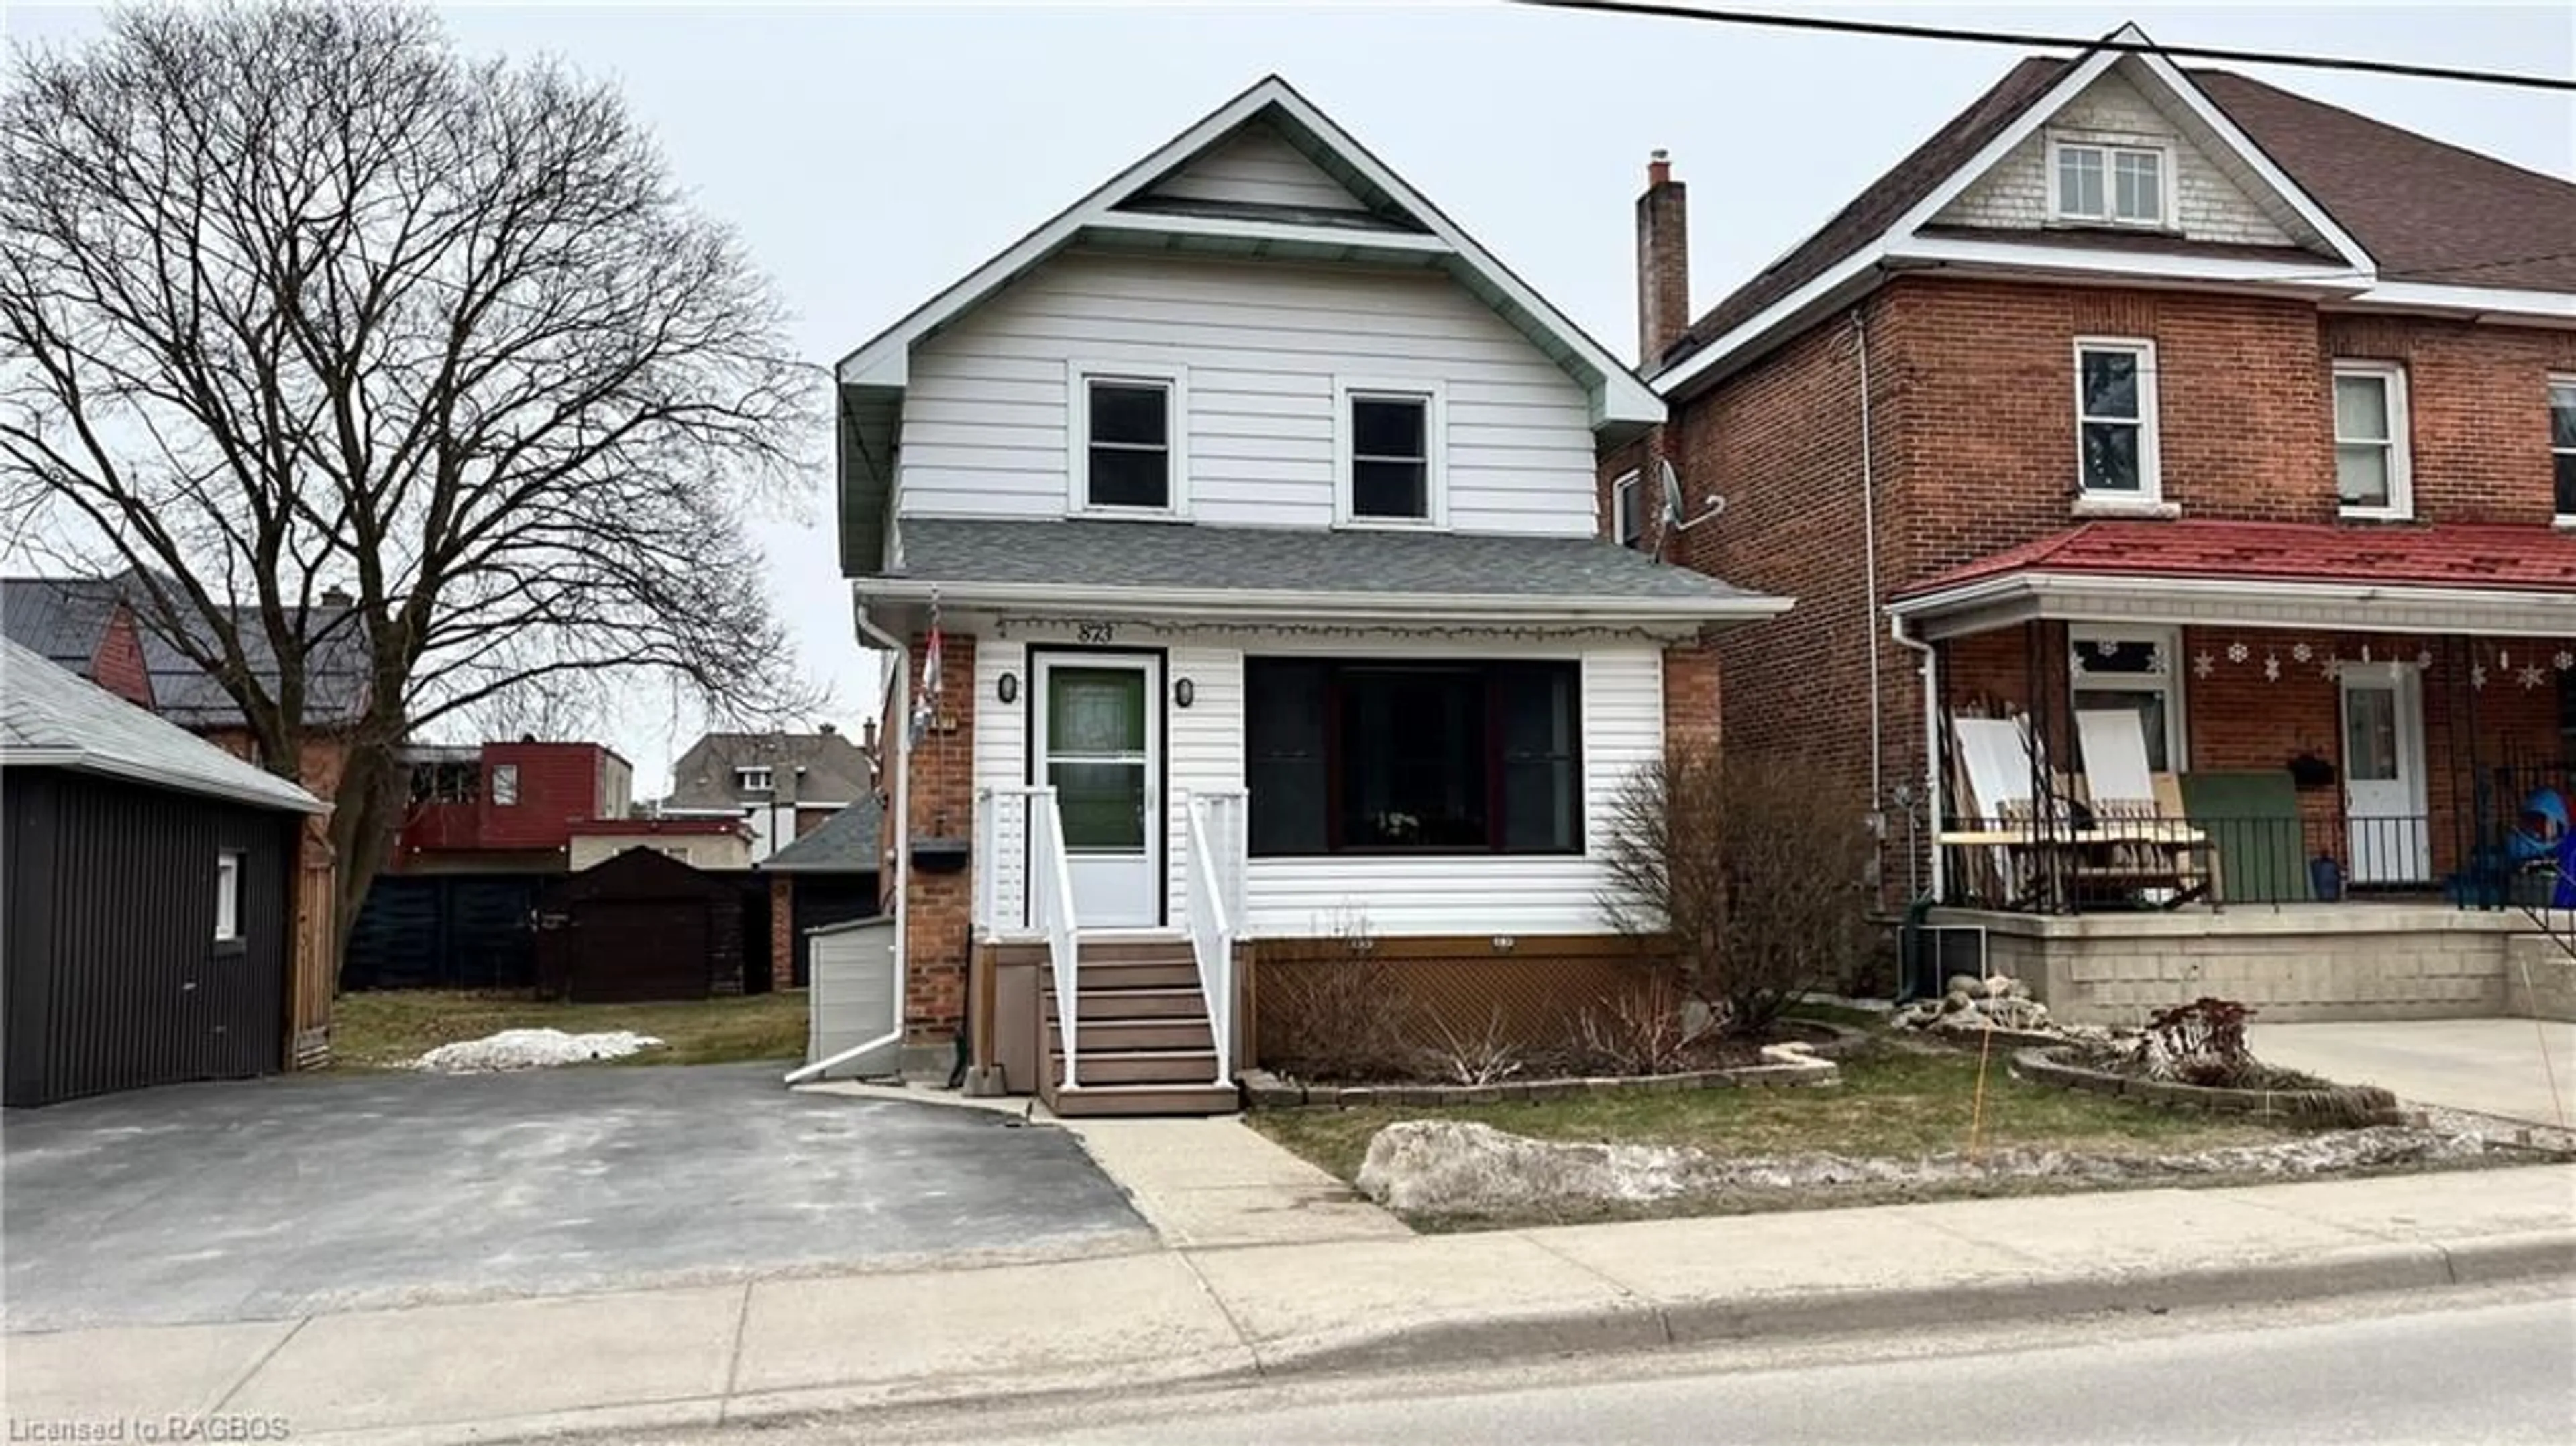 Frontside or backside of a home for 873 3rd Avenue, Owen Sound Ontario N4K 4P4